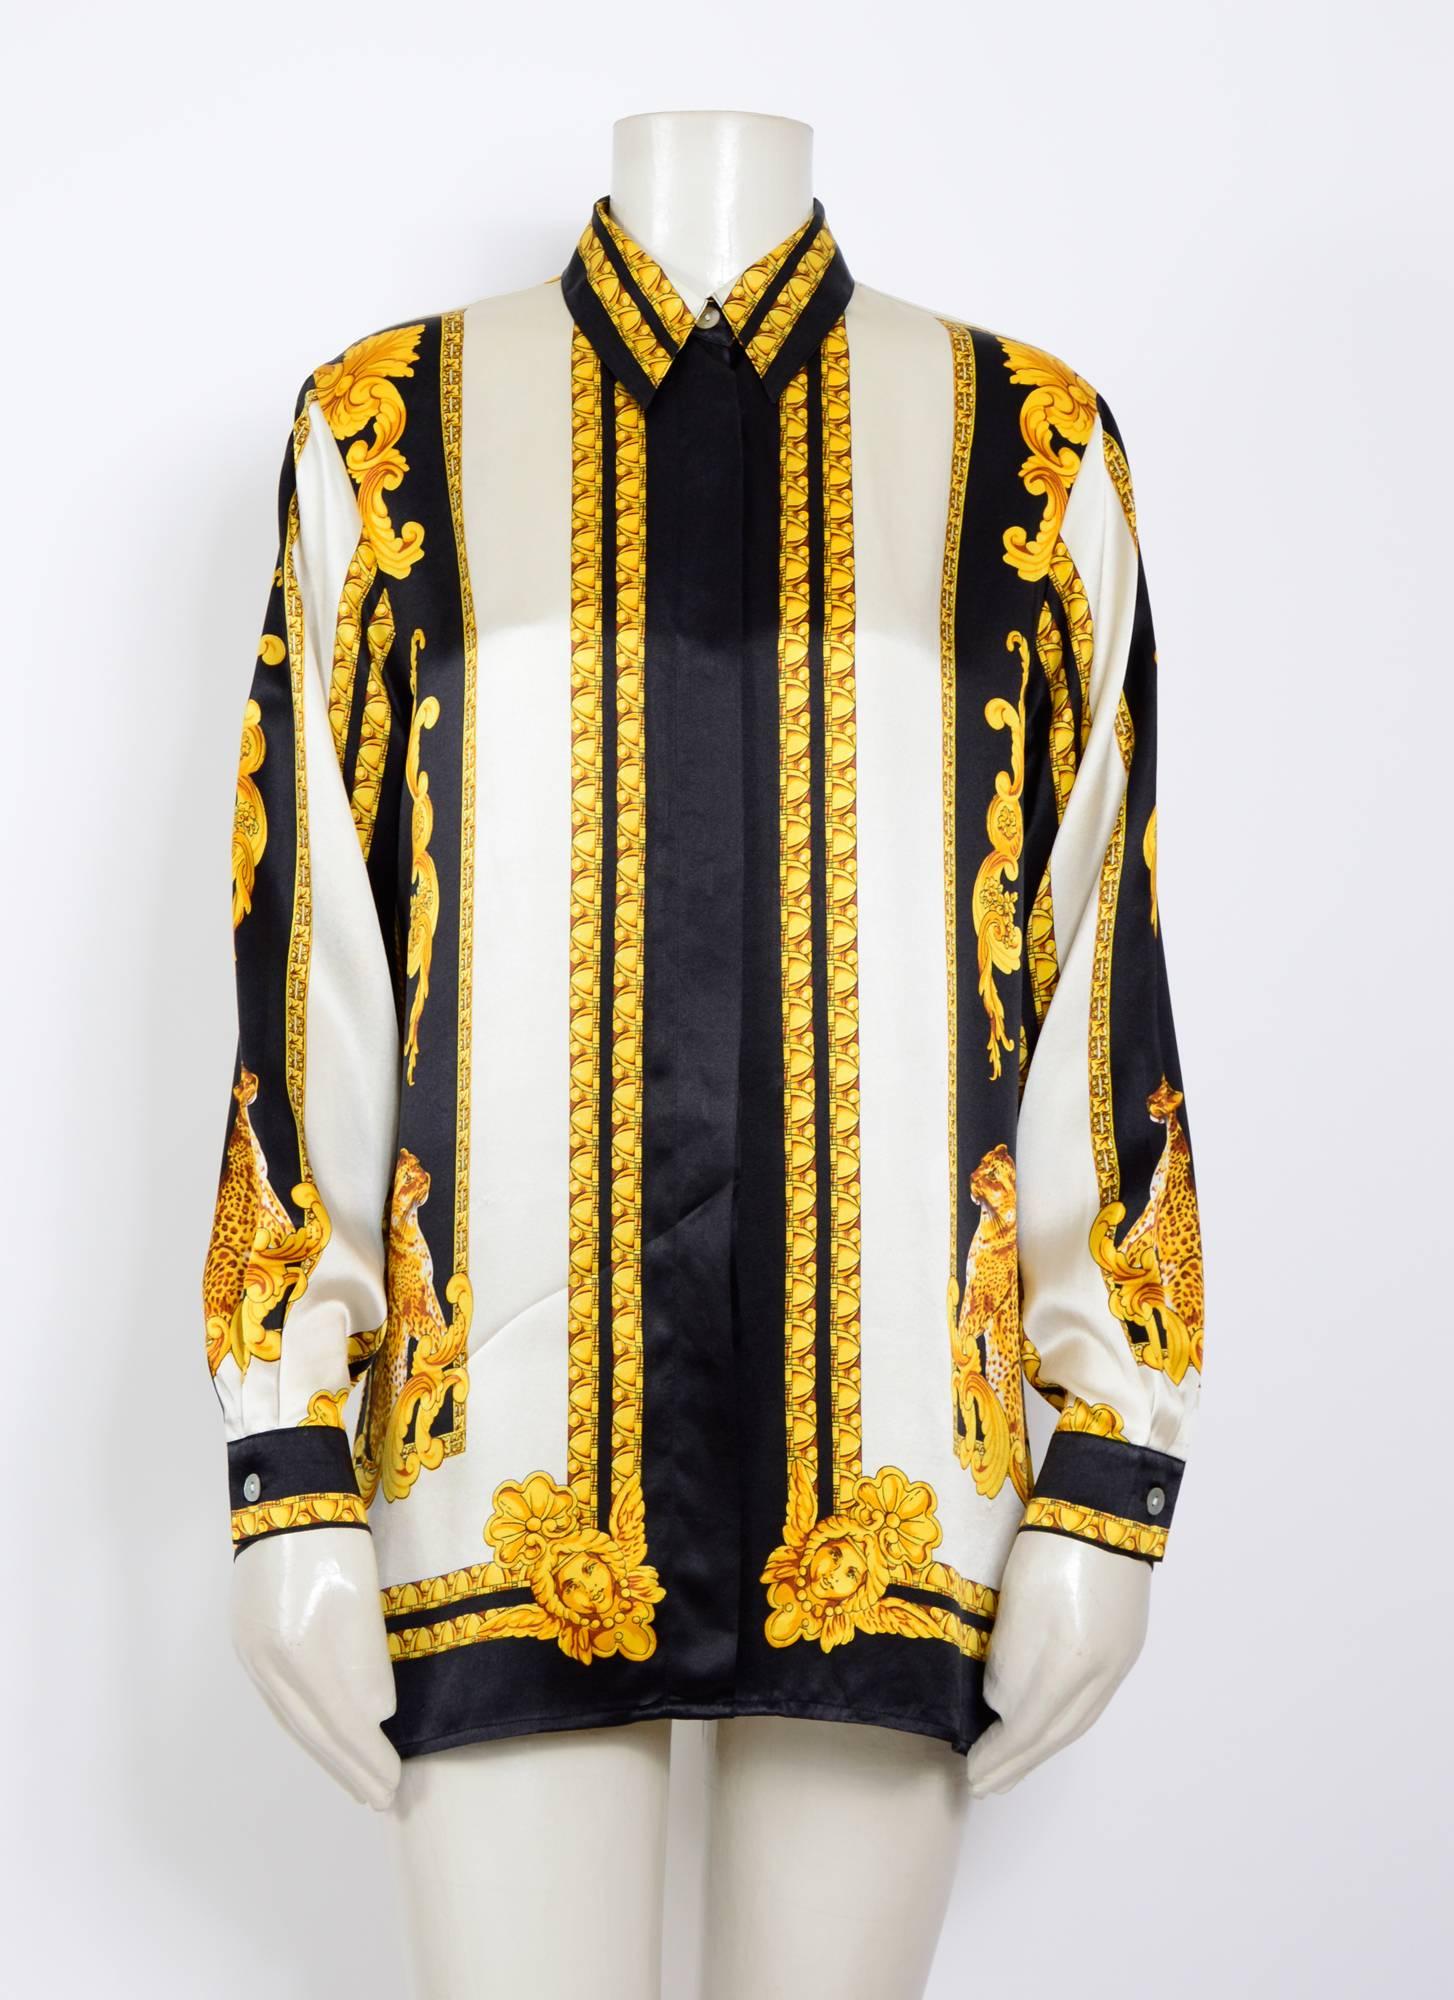 vintage 1980s tiger print shirt. 
Made in a very beautiful 100% silk.
Measurements are taken flat: Sh to Sh 16inch/41cm - Ua to Ua 20inch/51cm(x2) - Waist 20inch/51cm(x2) - Sleeve 23inch/58cm - Total length 29inch/74cm